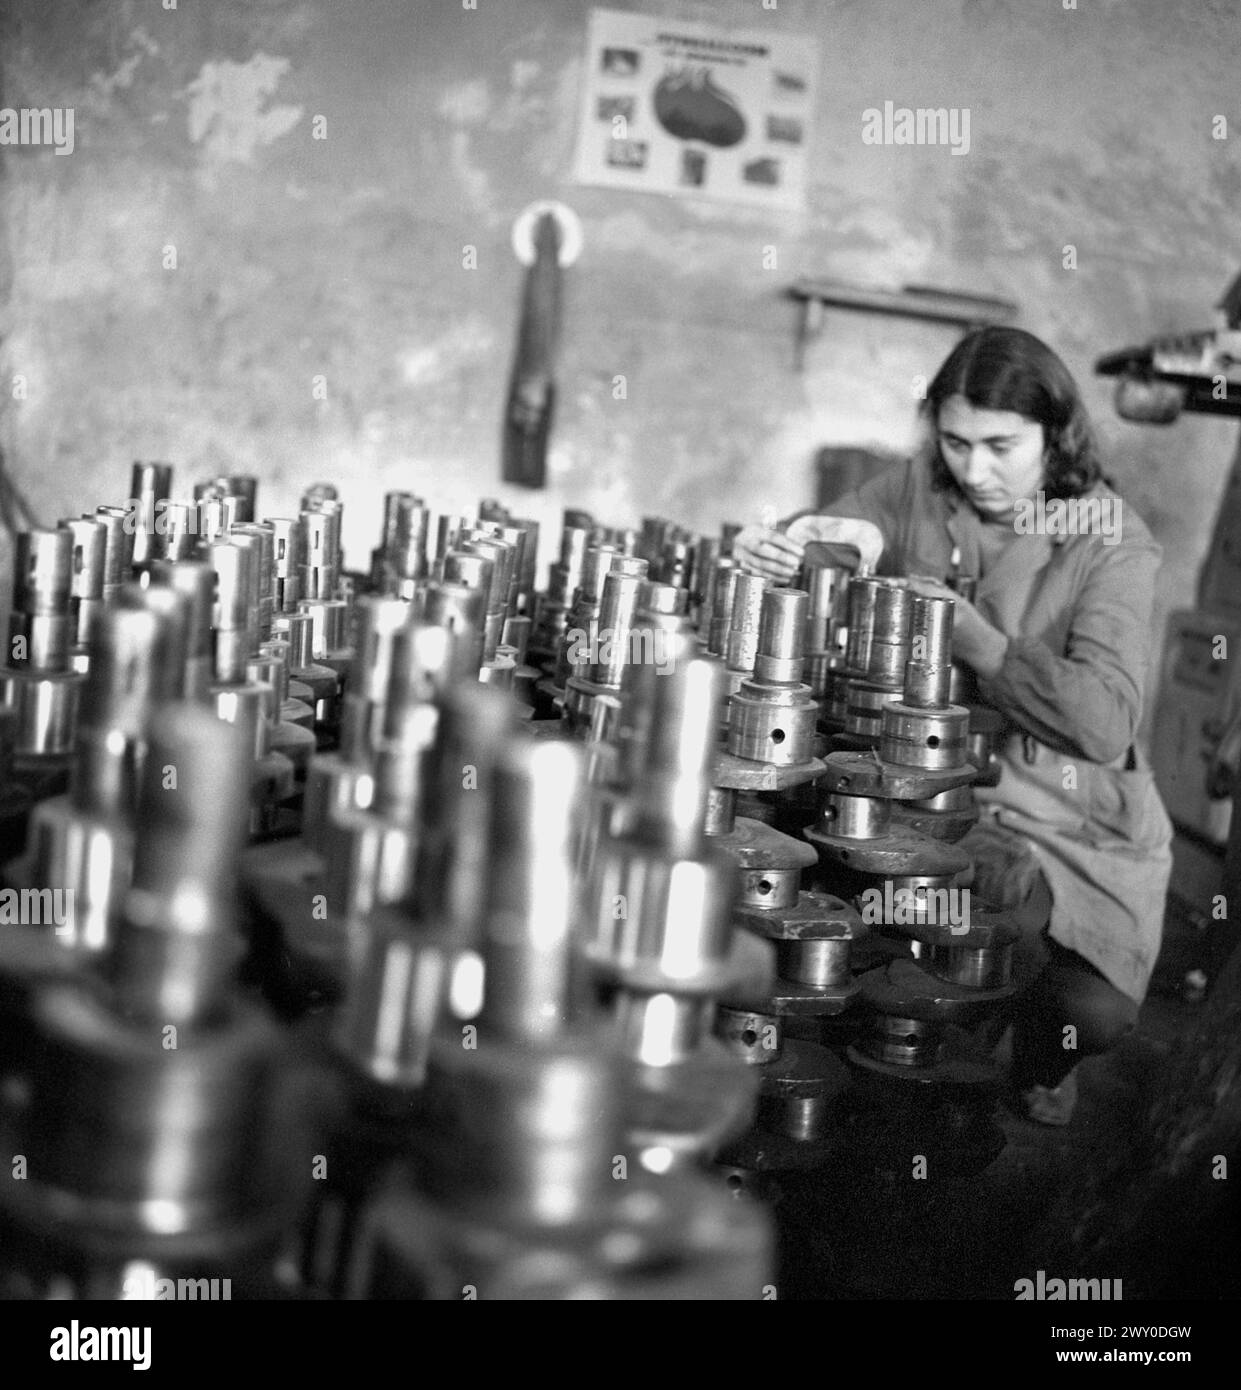 Socialist Republic of Romania in the 1970s. Woman worker in a state owned factory. Stock Photo